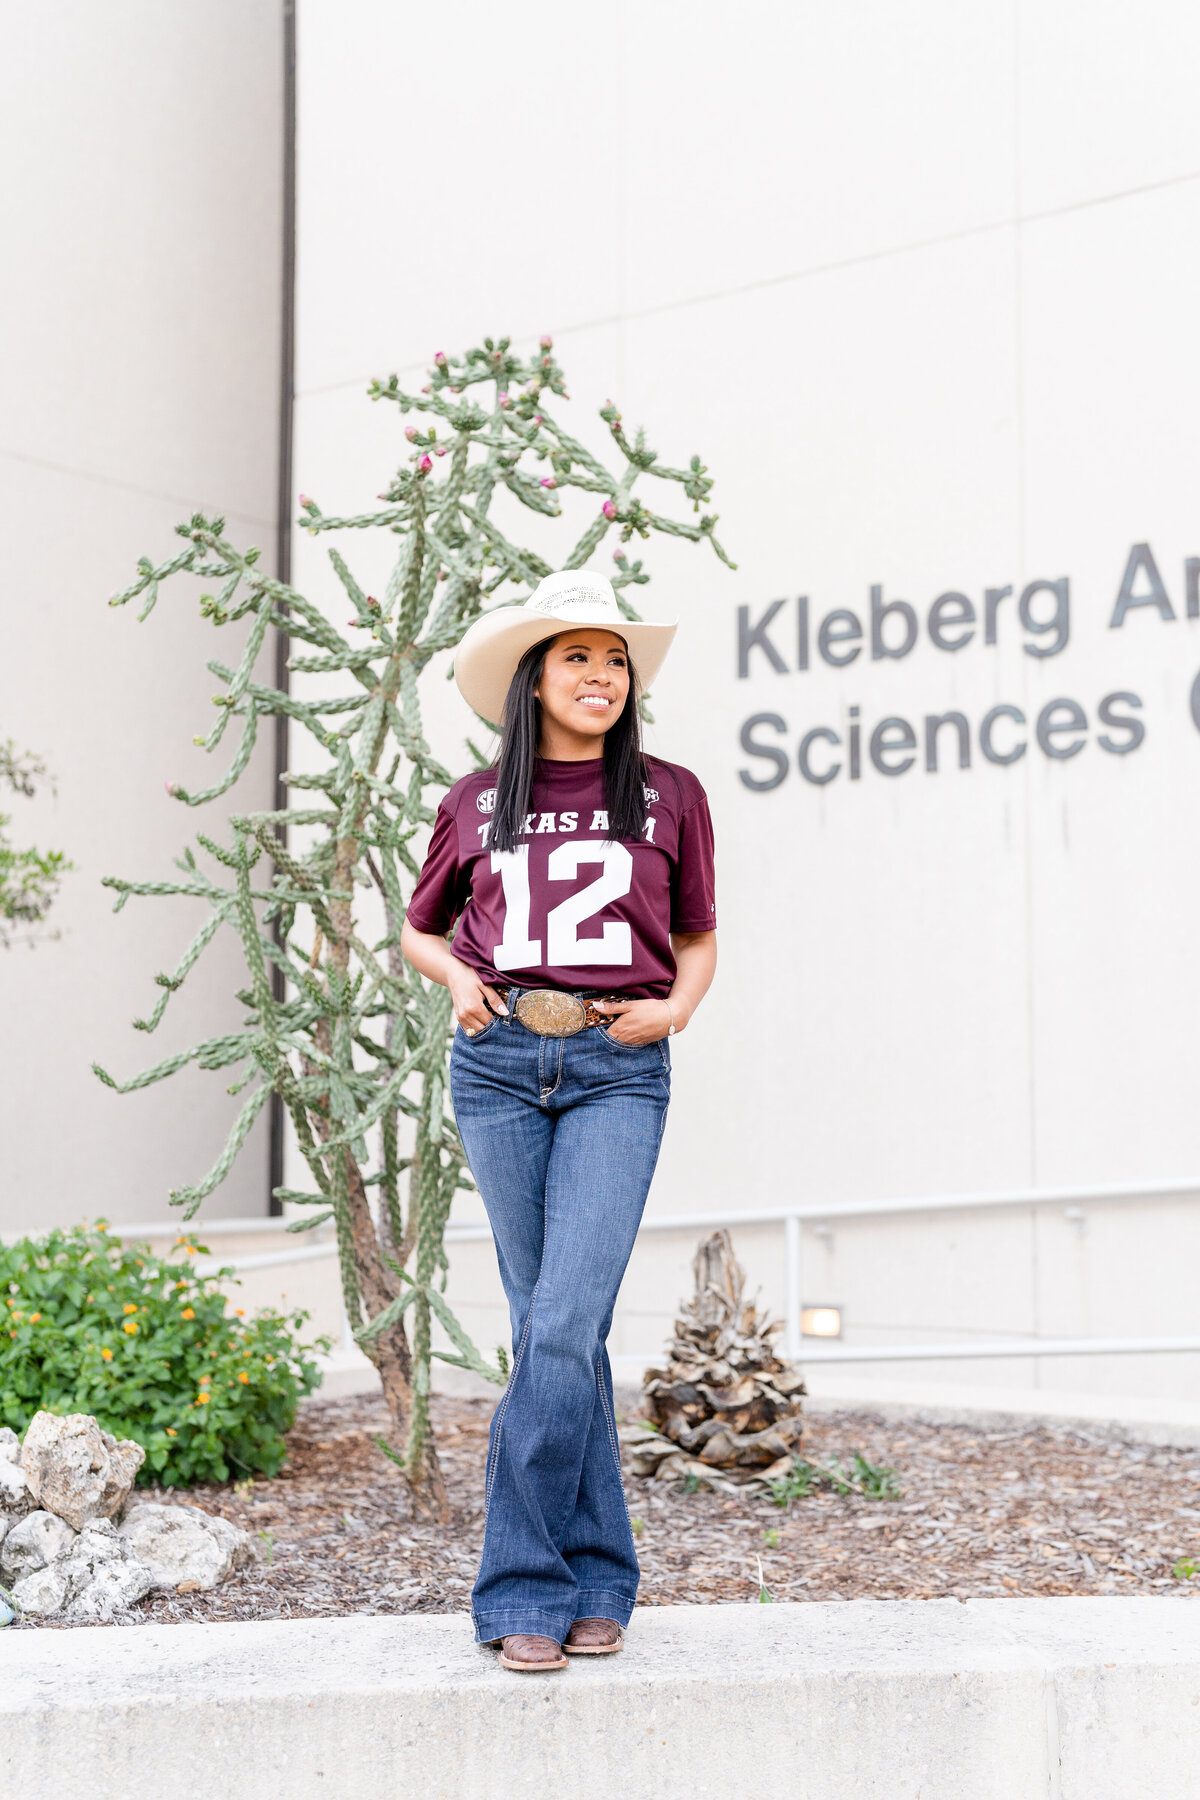 Texas A&M senior girl standing on ledge in front of Kleberg while wearing maroon jersey and jeans with cowboy hat